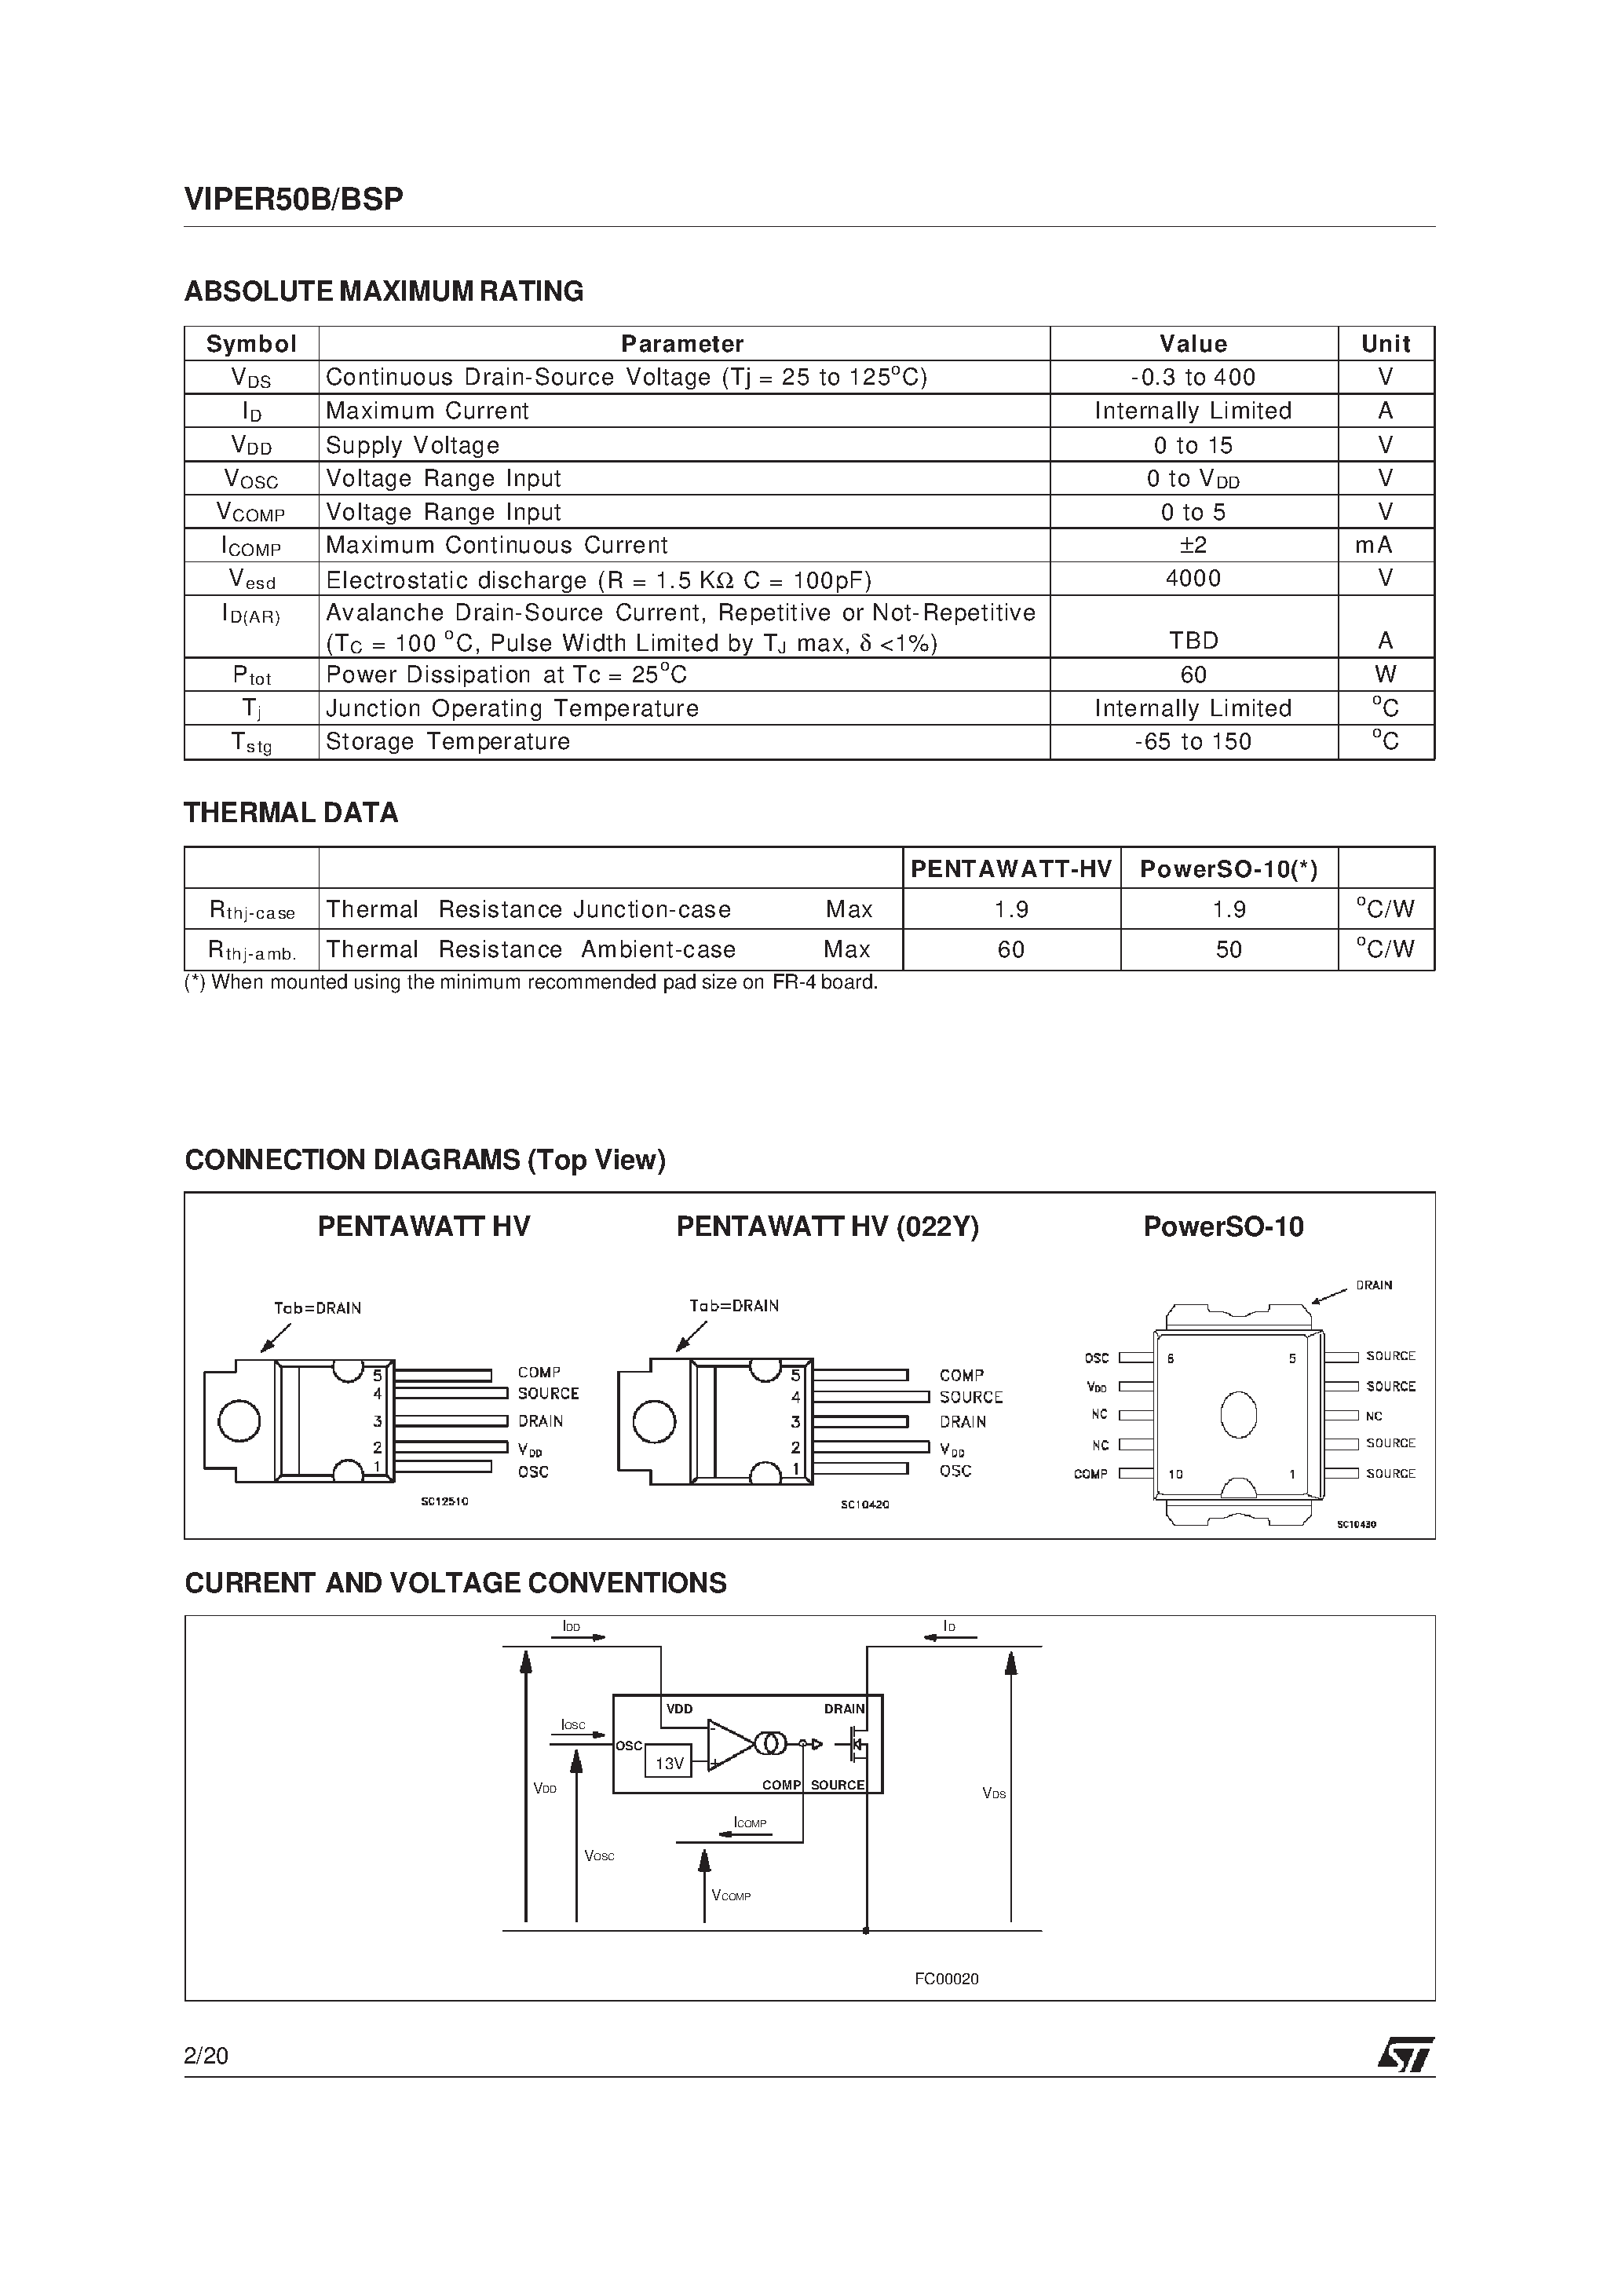 Datasheet VIPER50B - SMPS PRIMARY I.C. page 2